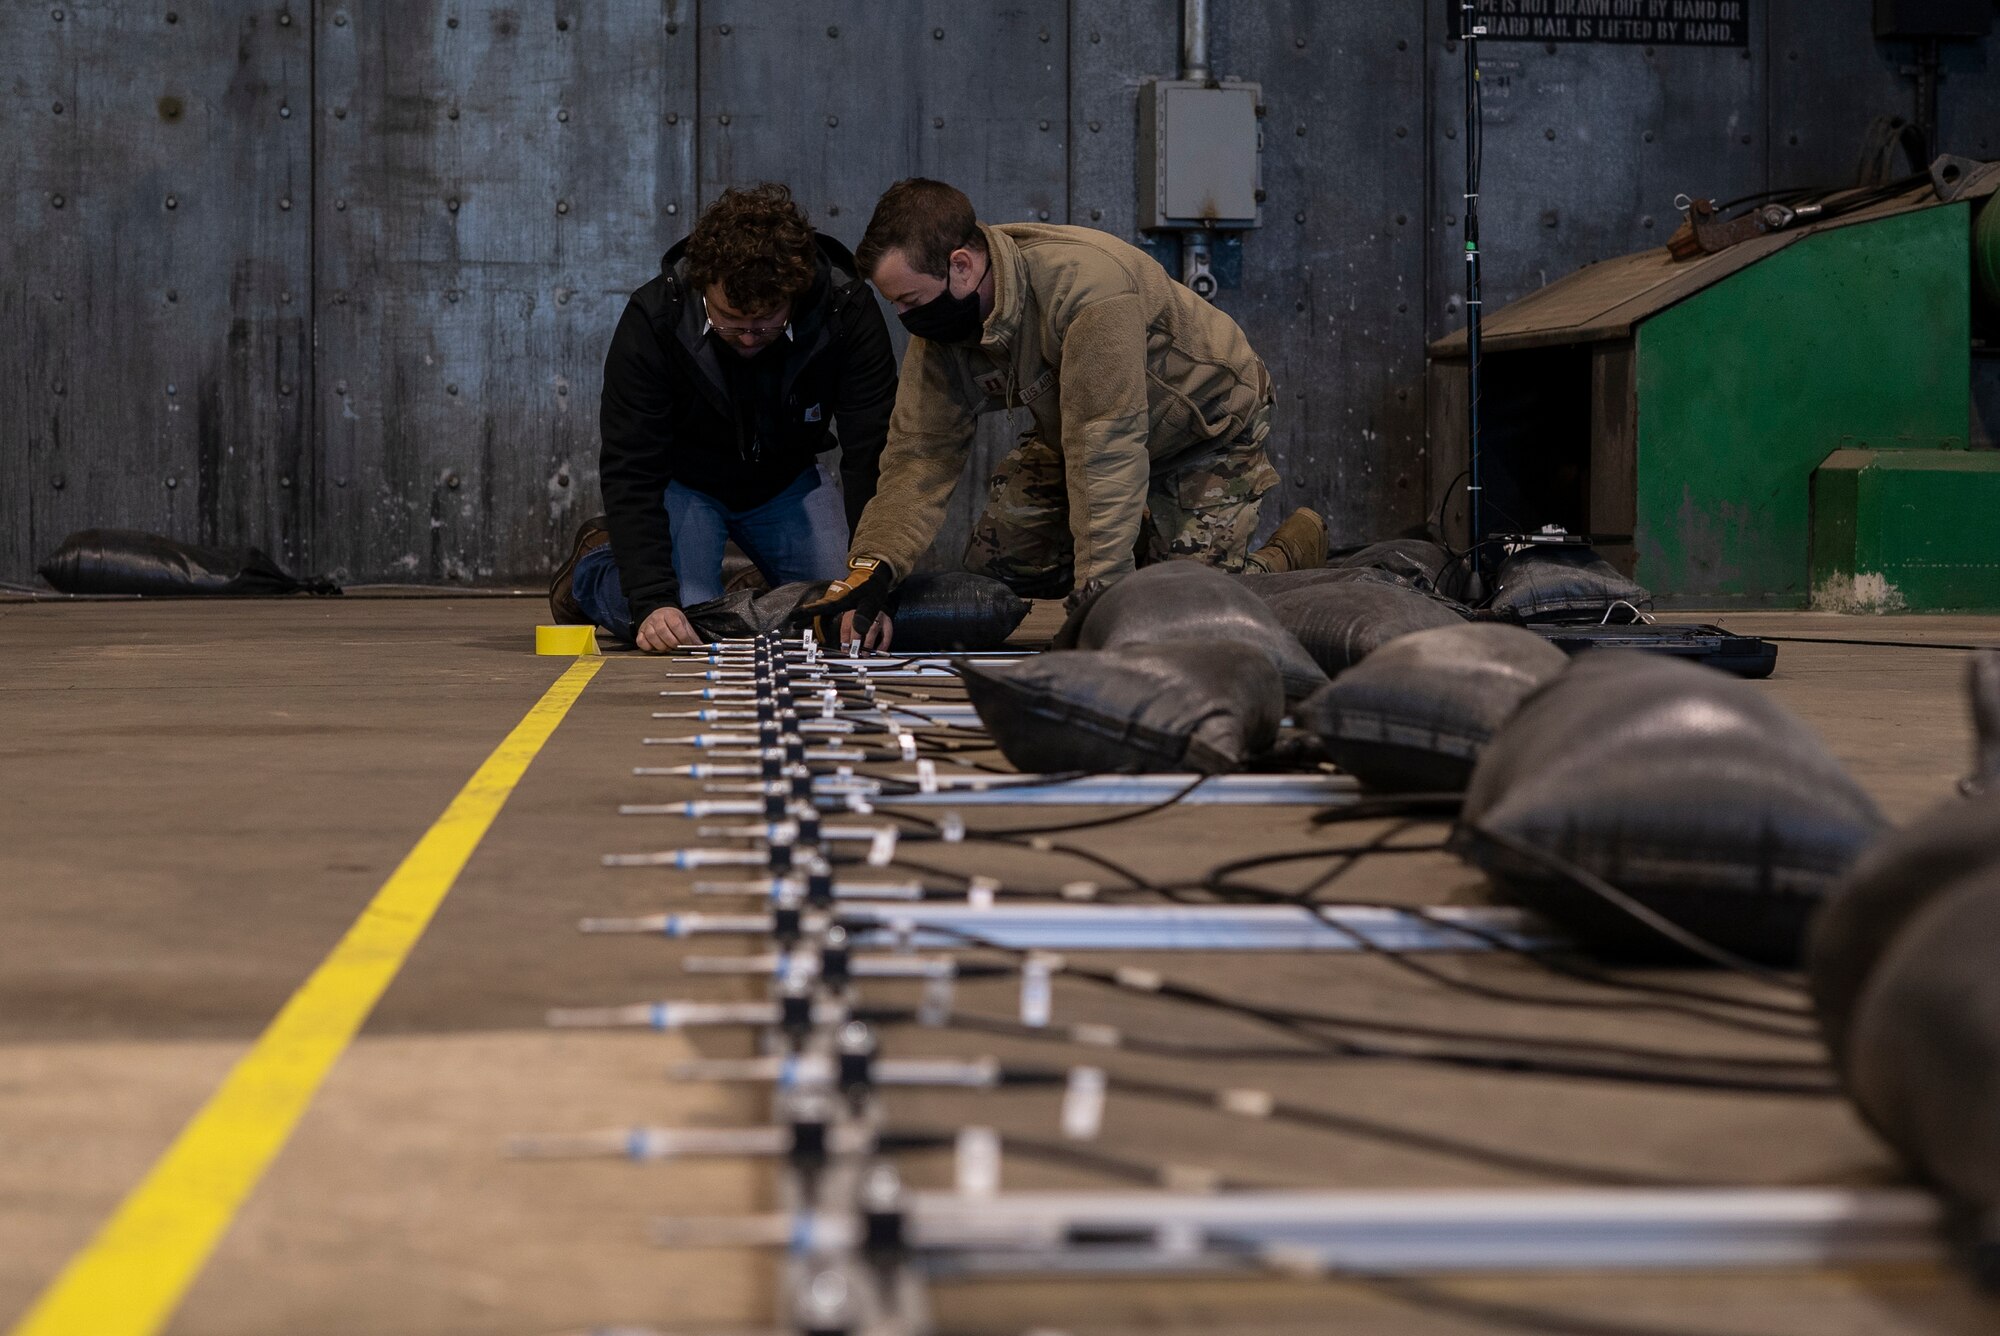 U.S. Air Force Capt. Christopher Hopkins, systems sensory engineer, and Conner Campbell, an acoustic monitoring technician, both stationed at Wright-Patterson Air Force Base, Ohio, calibrate monitoring devices prior to an F-35A Lightning II acoustic and emission test at Royal Air Force Lakenheath, England, May 4, 2021. The sensors monitor the acoustic levels present in the shelter during different stages of an engine run. (U.S. Air Force photo by Senior Airman Jessi Monte)